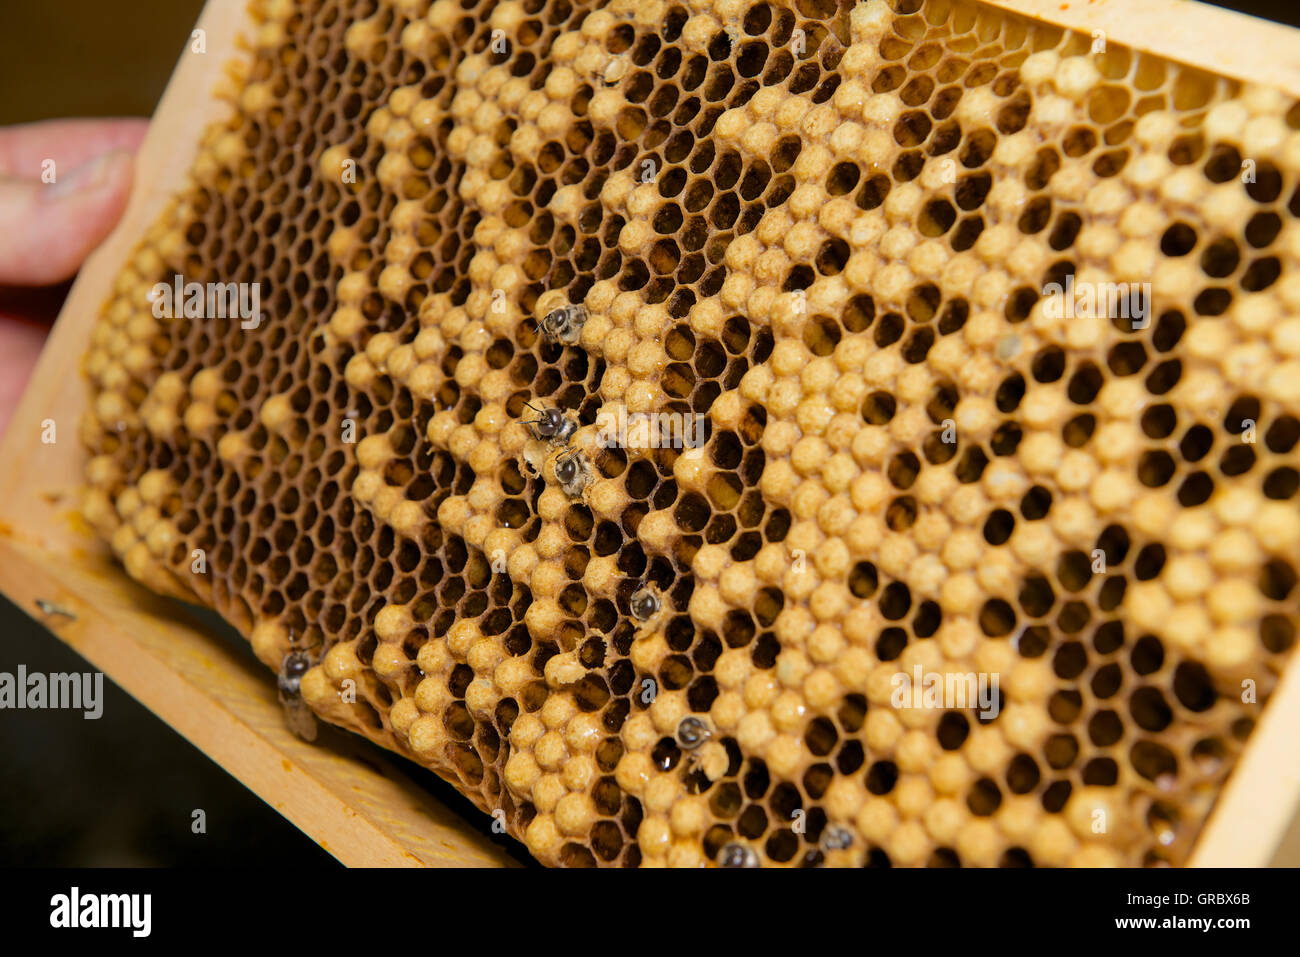 Honeycomb With Emerging Drones, Capped And Uncapped Cells Stock Photo